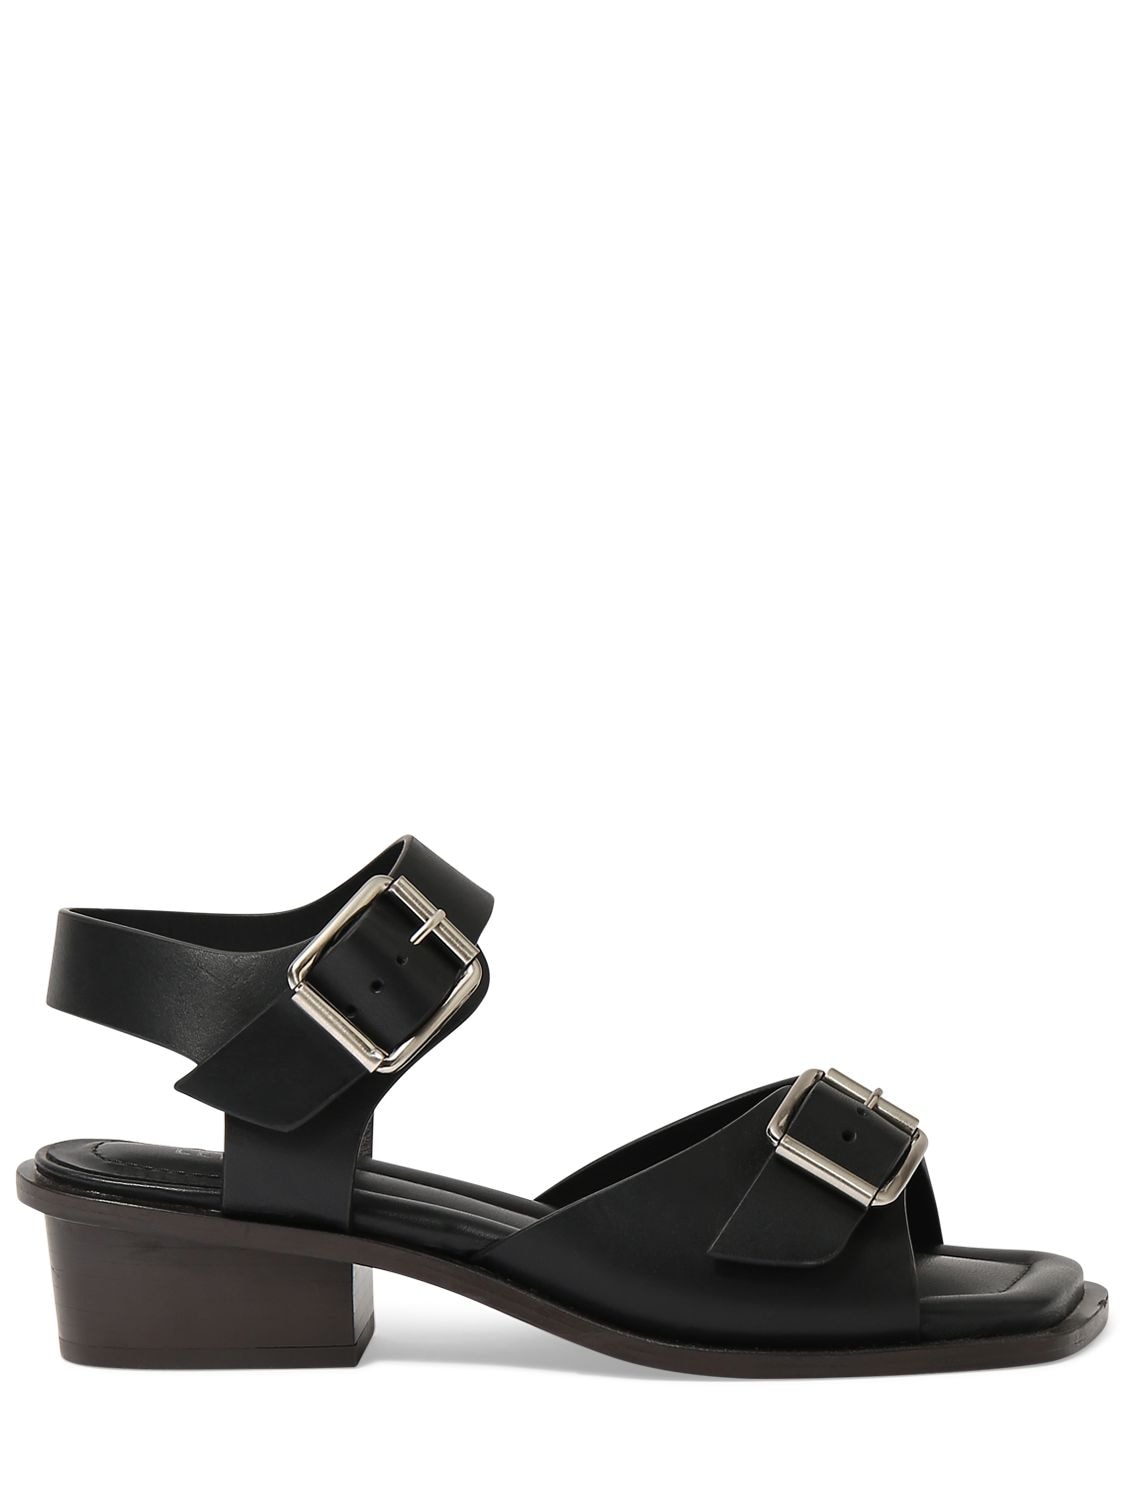 Lemaire Square Heeled Sandals With Straps 35 In Black